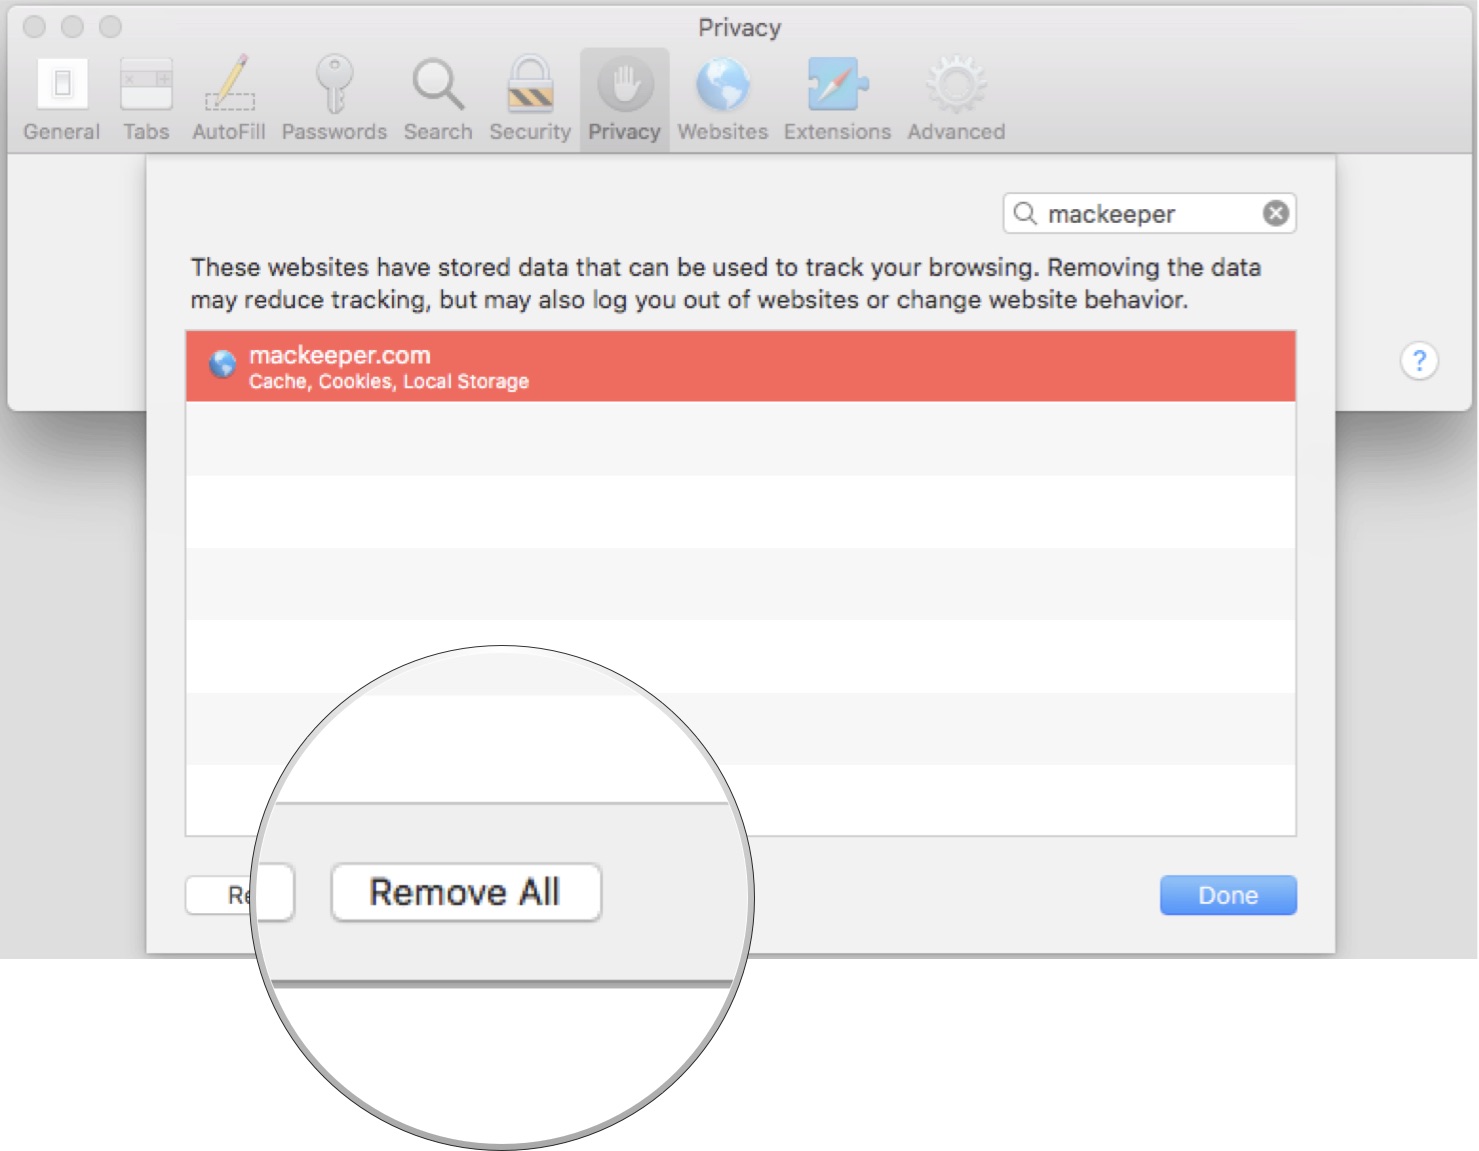 enter MacKeeper in the Search box to show any data related to MacKeeper and click Remove All